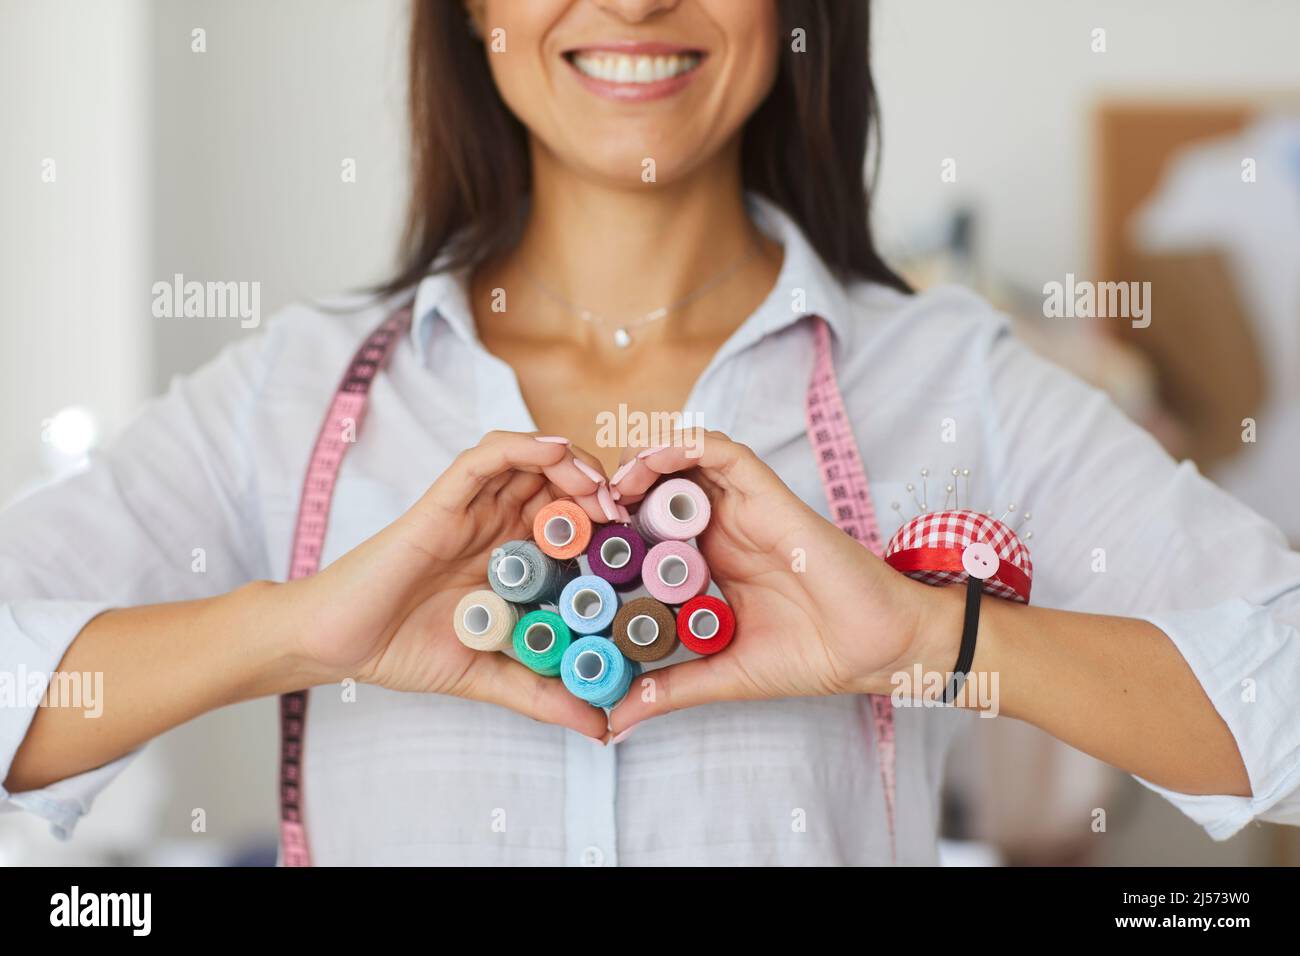 Smiling seamstress show heart love hand gesture Stock Photo